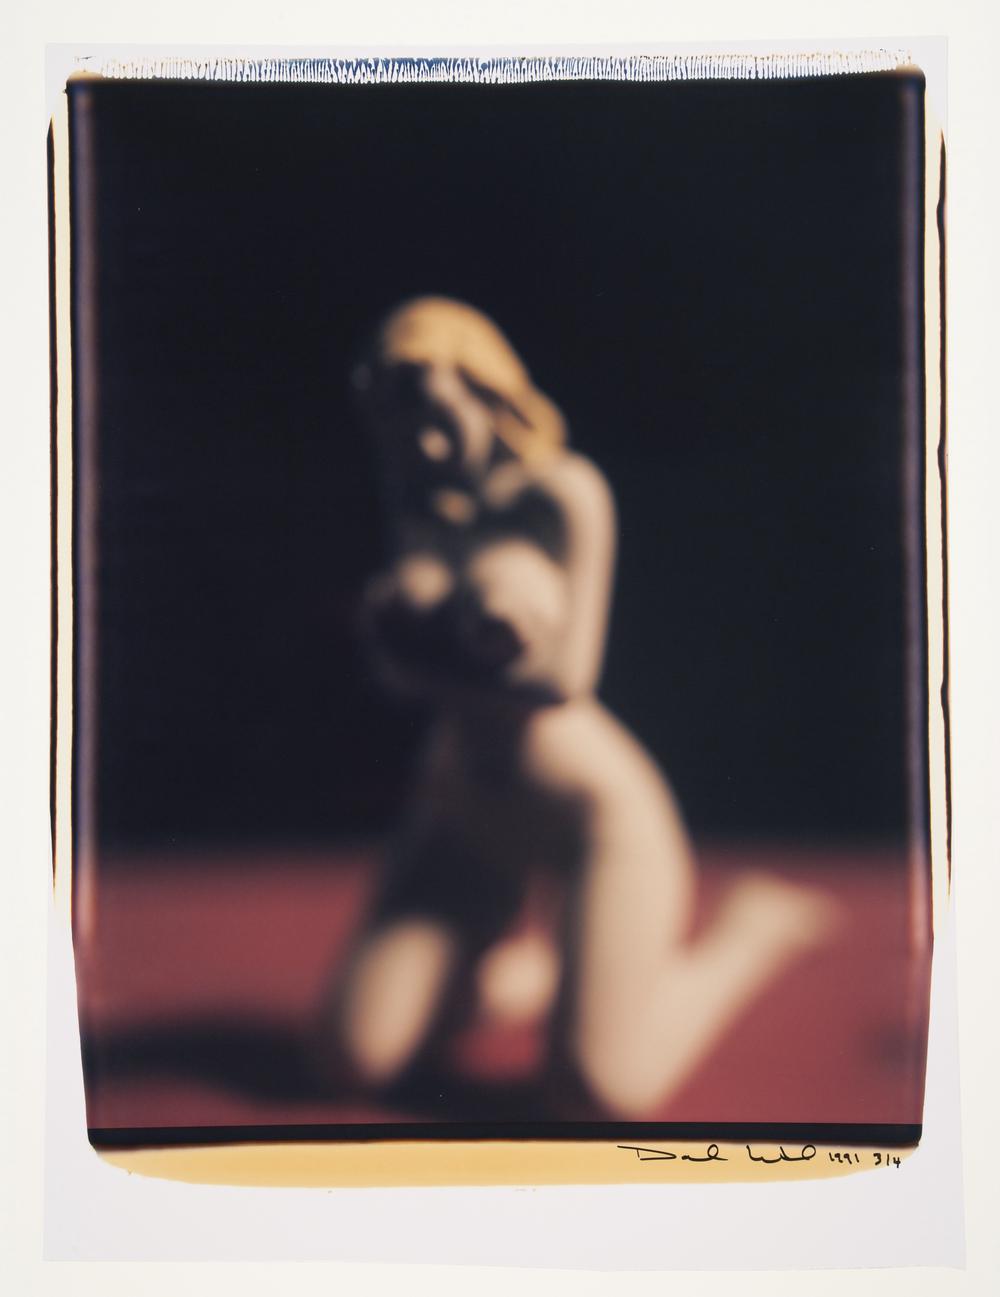 blurry image of nude blonde woman kneeling and facing the viewer while trying to cover herself